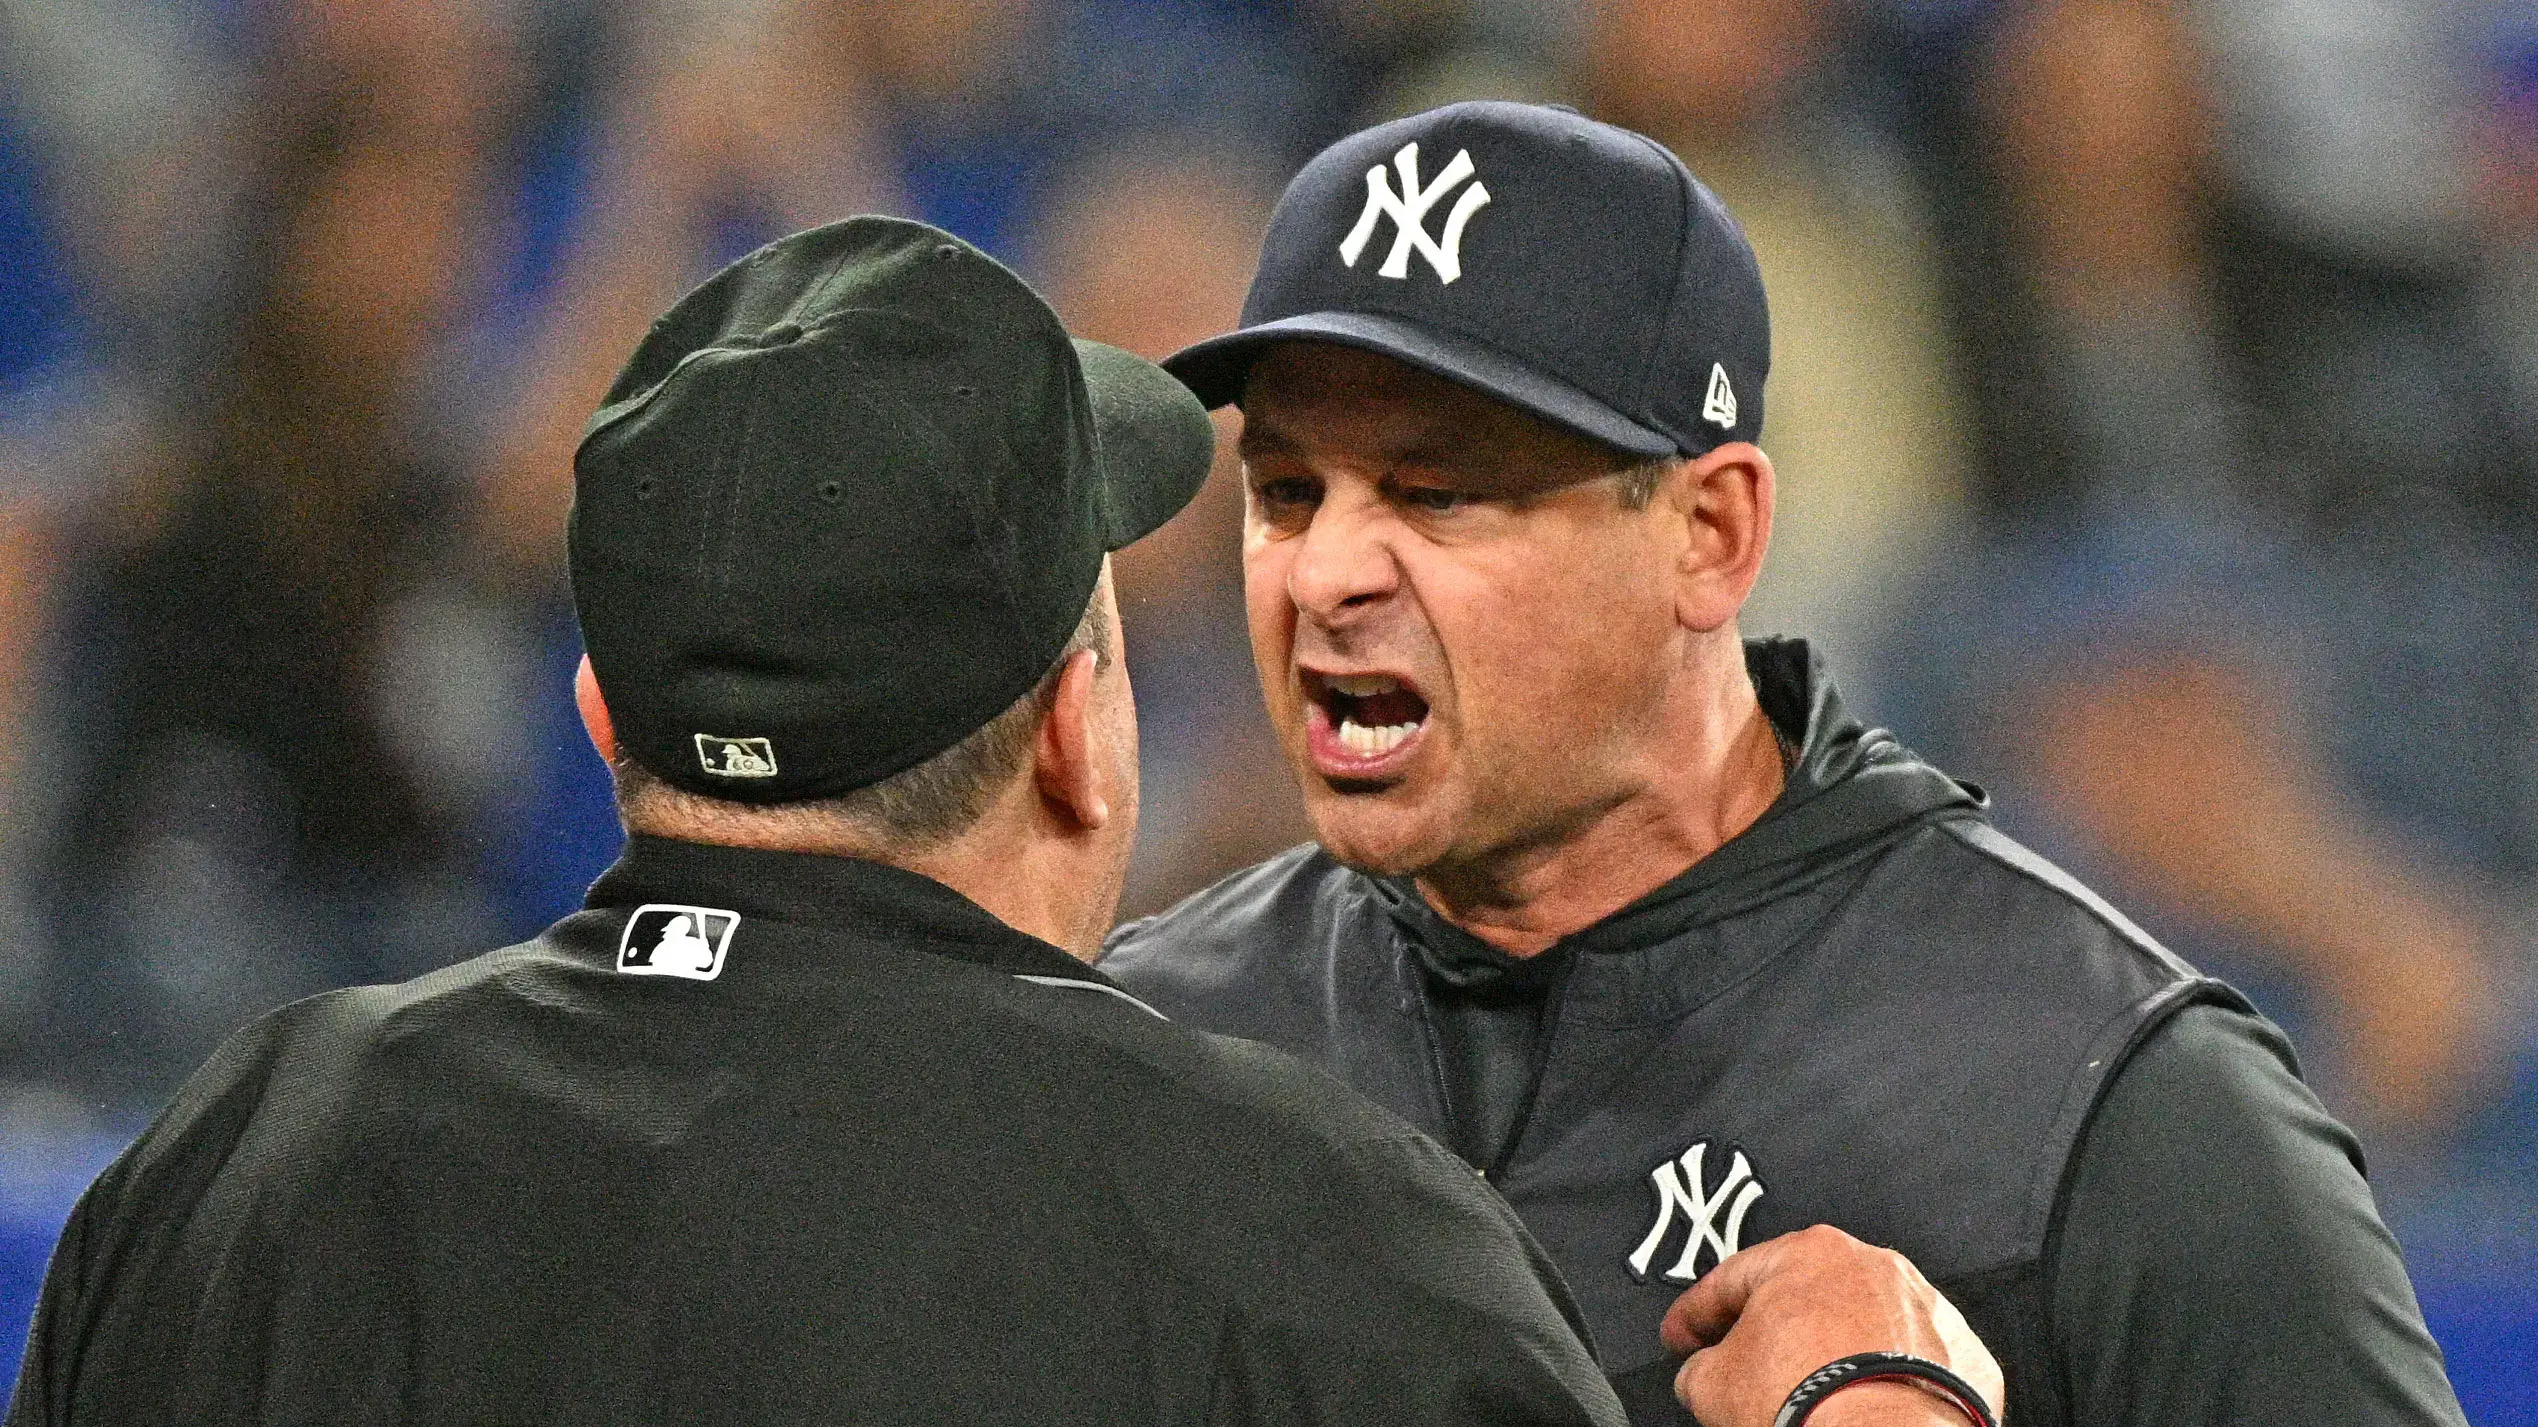 May 4, 2022; Toronto, Ontario, CAN; New York Yankees manager Aaron Boone (17) argues pitch calls with home plate umpire Marty Foster before being ejected from the game in the eighth inning against the Toronto Blue Jays at Rogers Centre. / Dan Hamilton-USA TODAY Sports